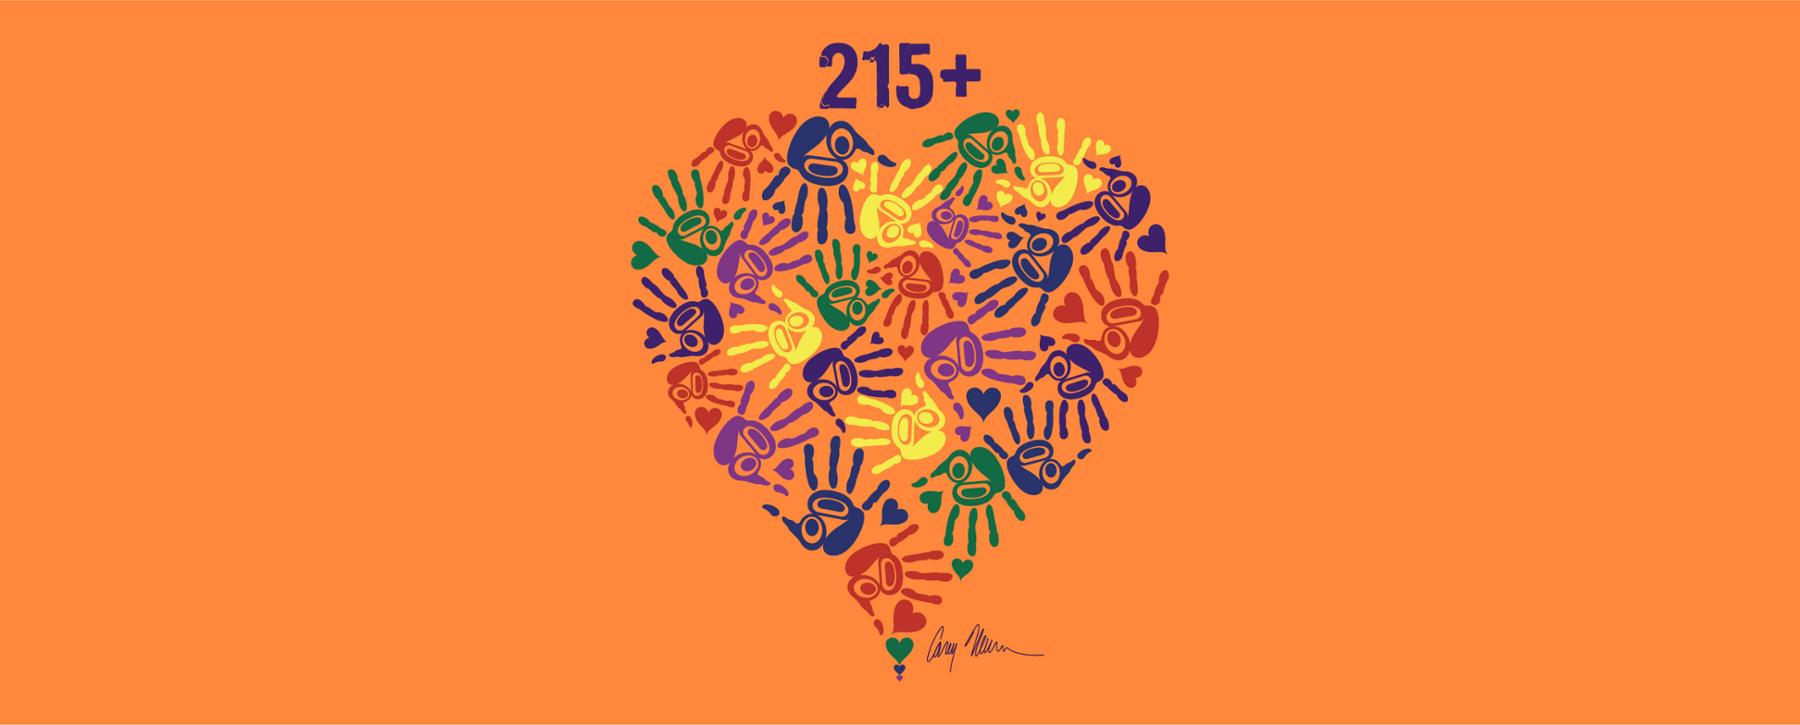 215+ graphic. A child's handprints form the shape of a heart on an orange background.